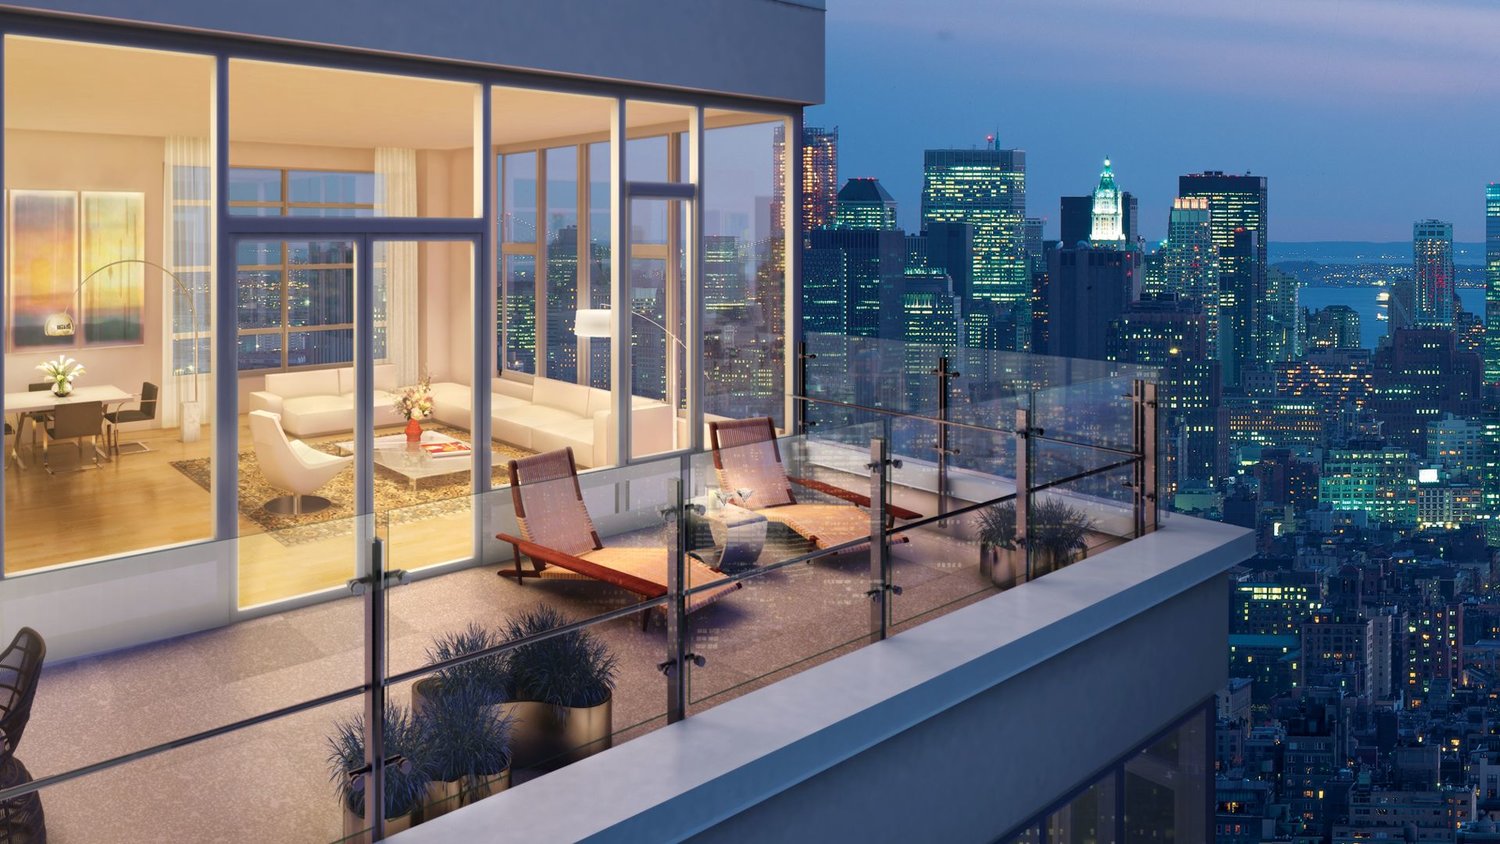 It’s Official: High-End Nyc Apartments Are A Better Investment Than The Stock Market